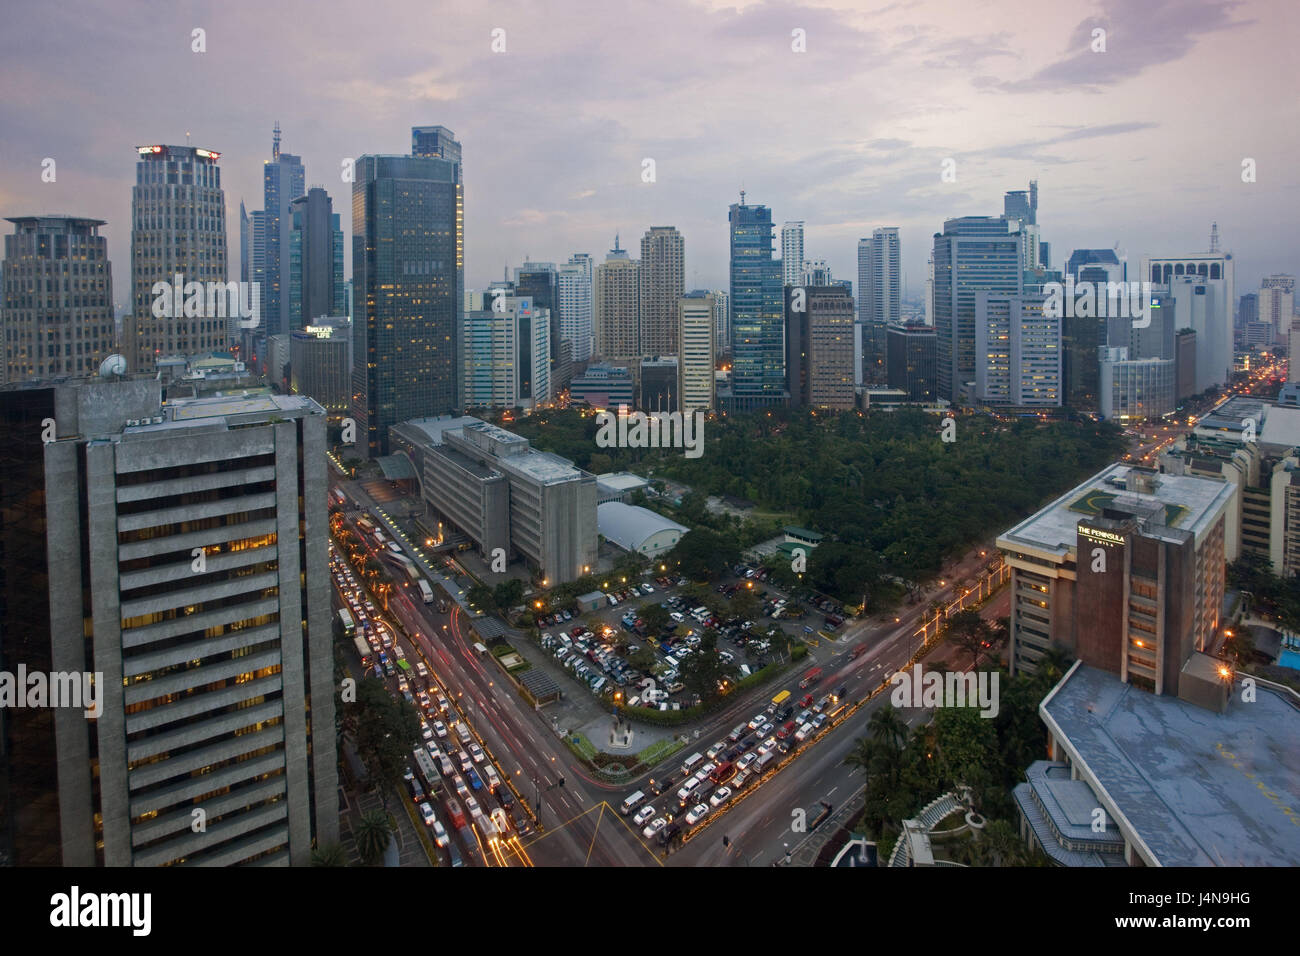 The Philippines, island Luzon, Manila, Makati District, high rises, lights, dusk, Asia, South-East Asia, town, capital, city, building, architecture, business premises, lighting, dusk, Stock Photo